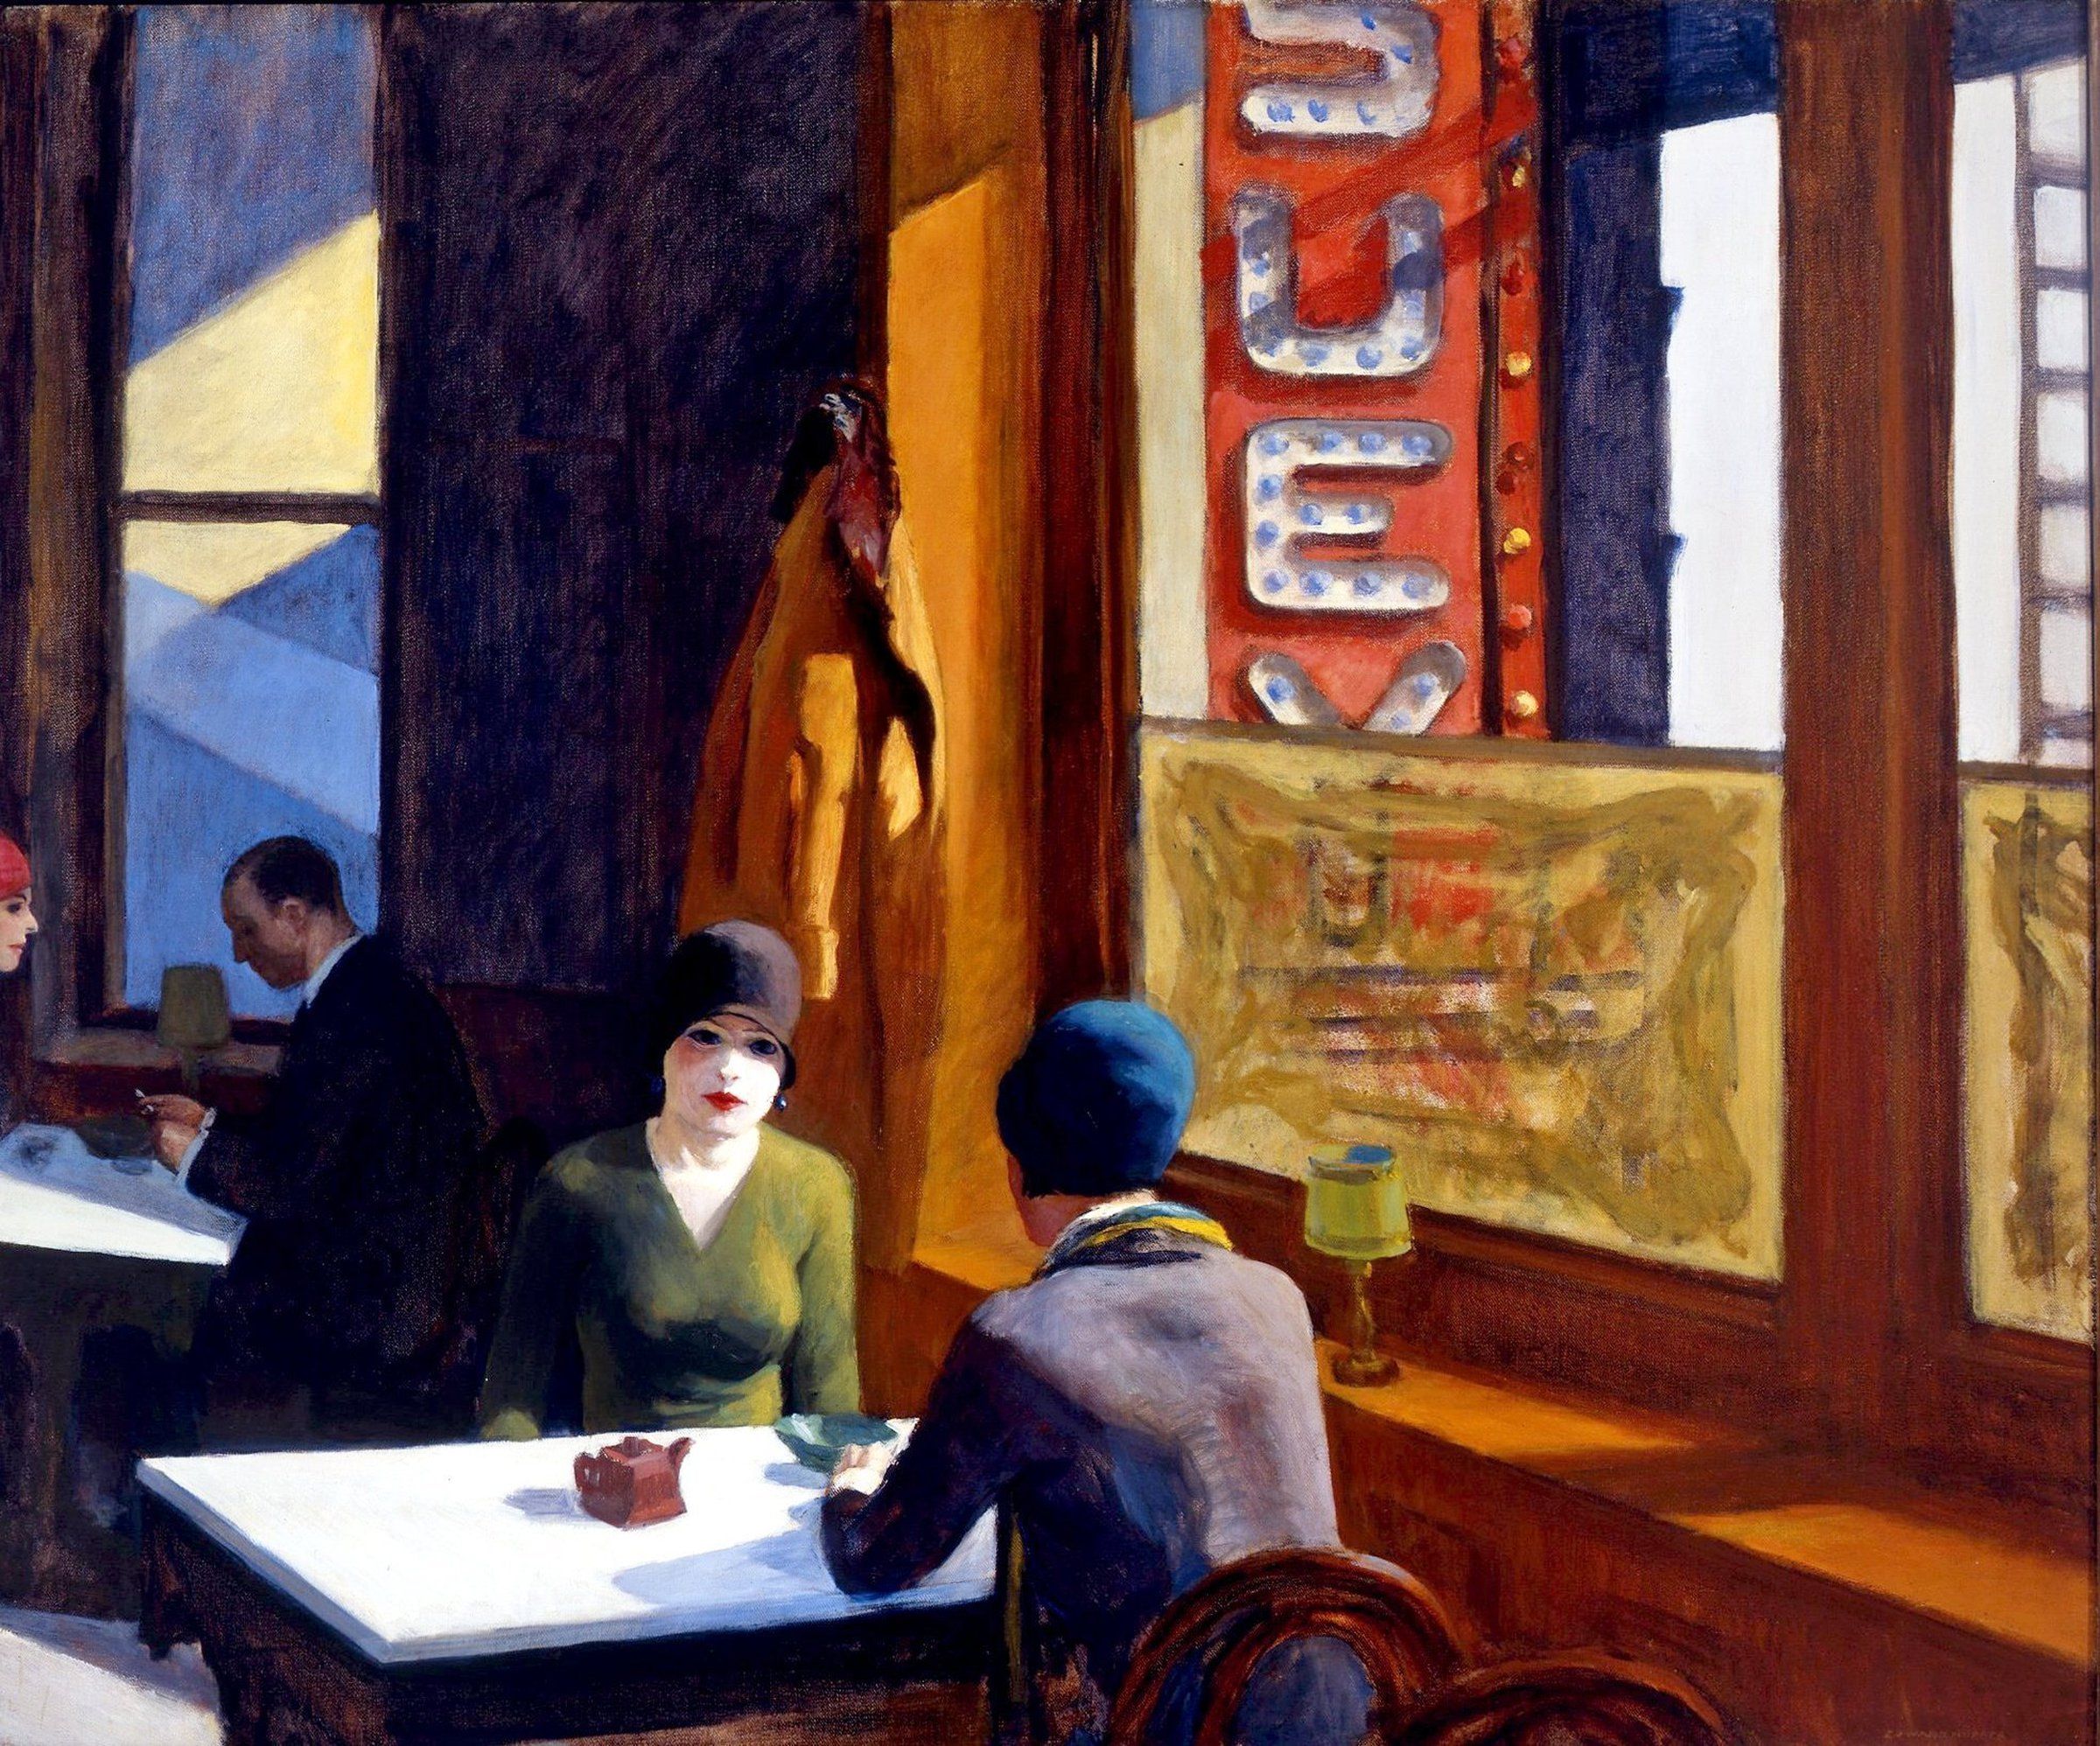 $70 million 'Chop Suey' painting won't go to Seattle Art Museum as